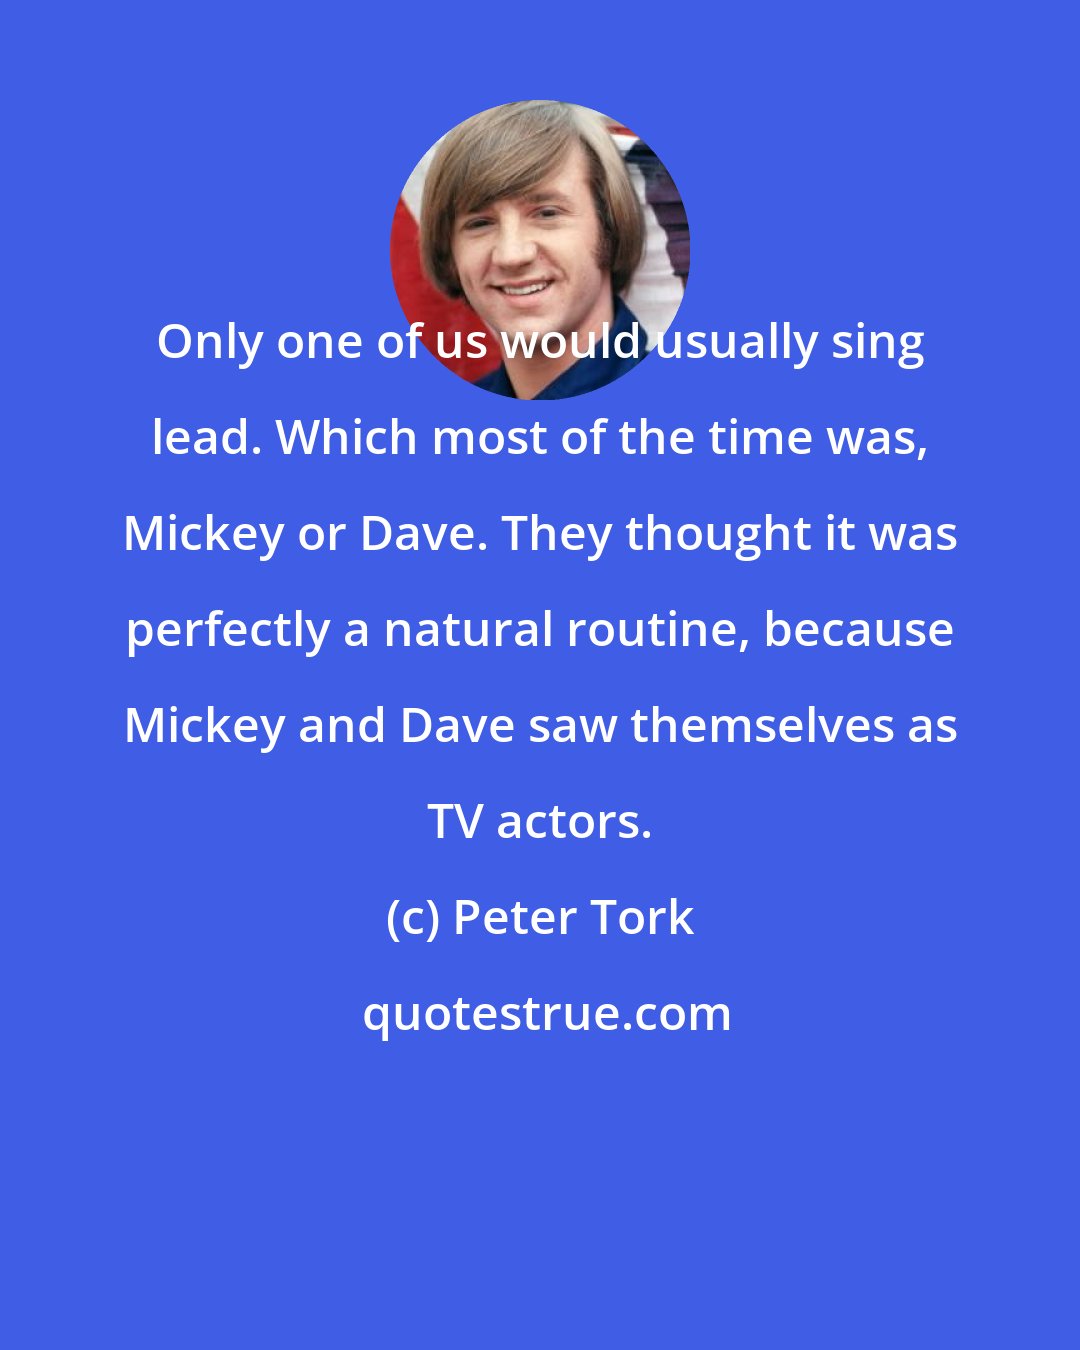 Peter Tork: Only one of us would usually sing lead. Which most of the time was, Mickey or Dave. They thought it was perfectly a natural routine, because Mickey and Dave saw themselves as TV actors.